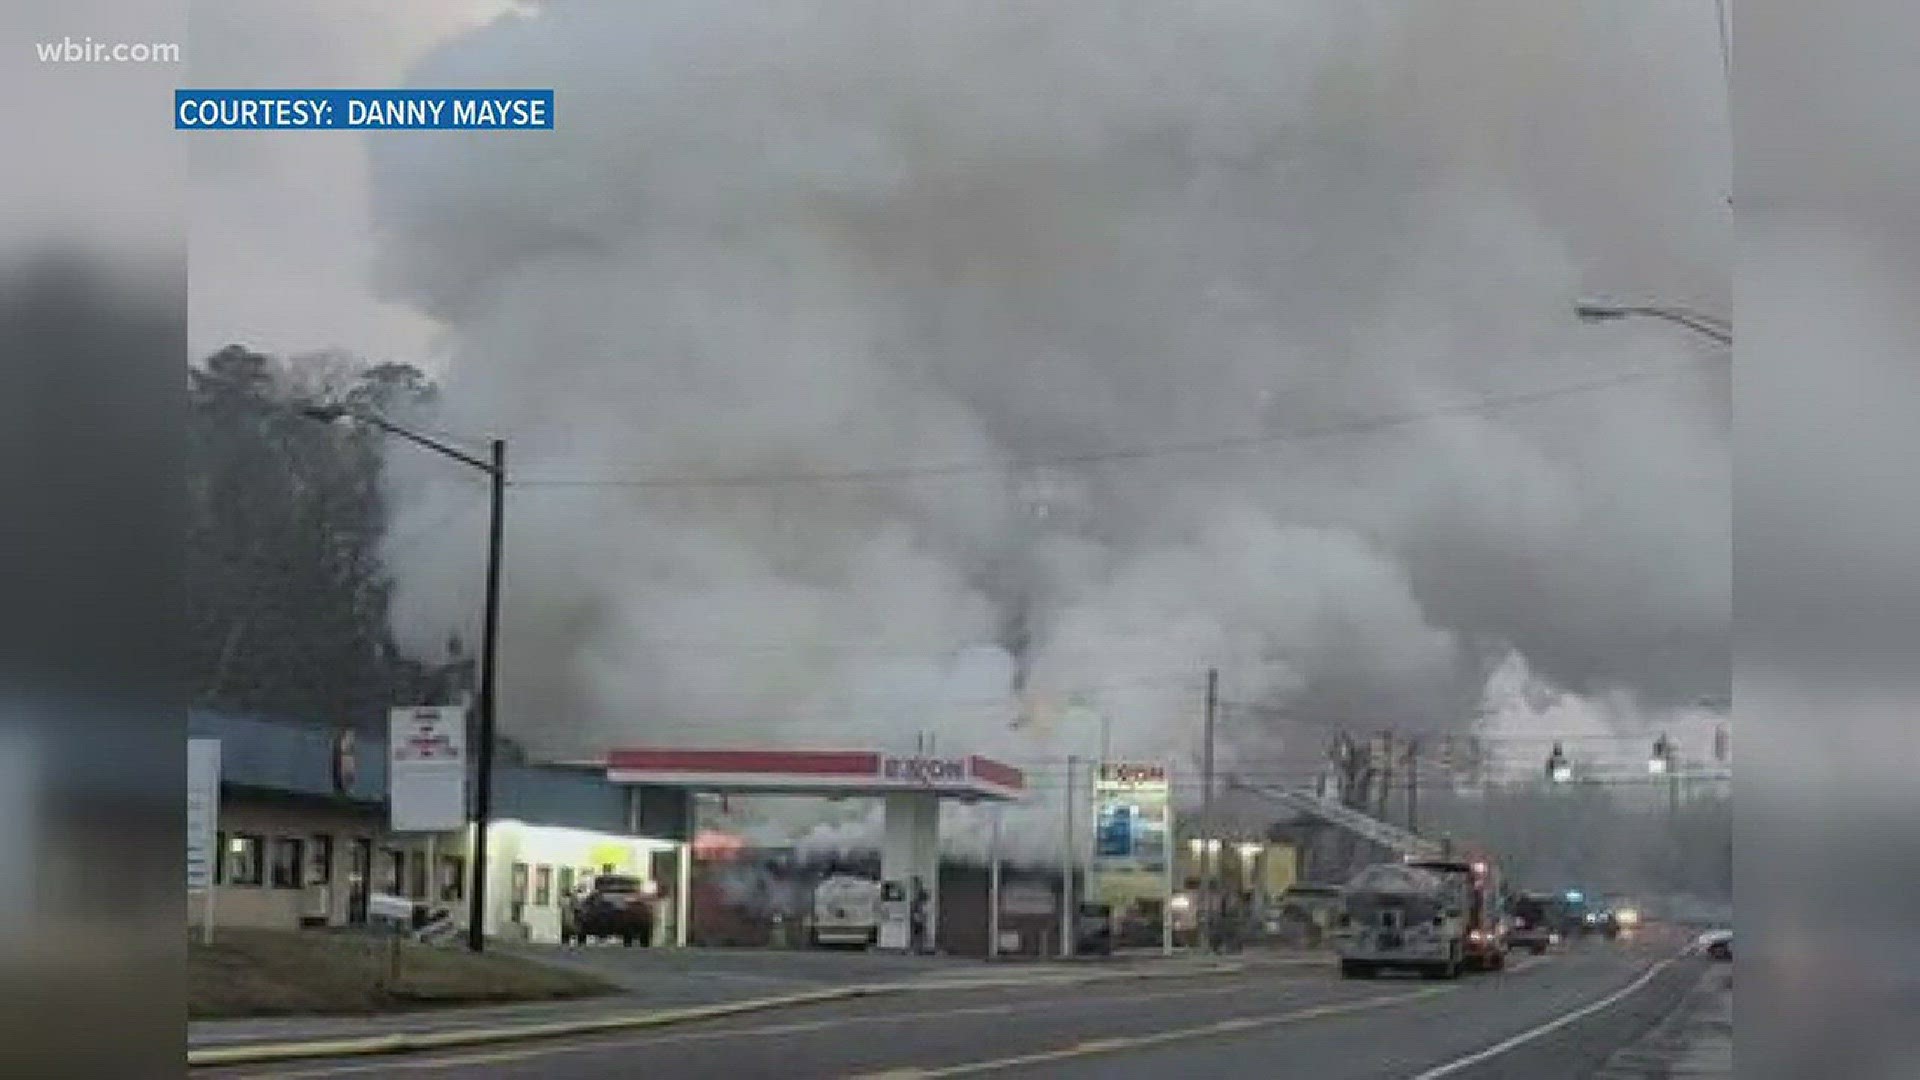 A fire destroyed a donut shop in Oneida Saturday morning.